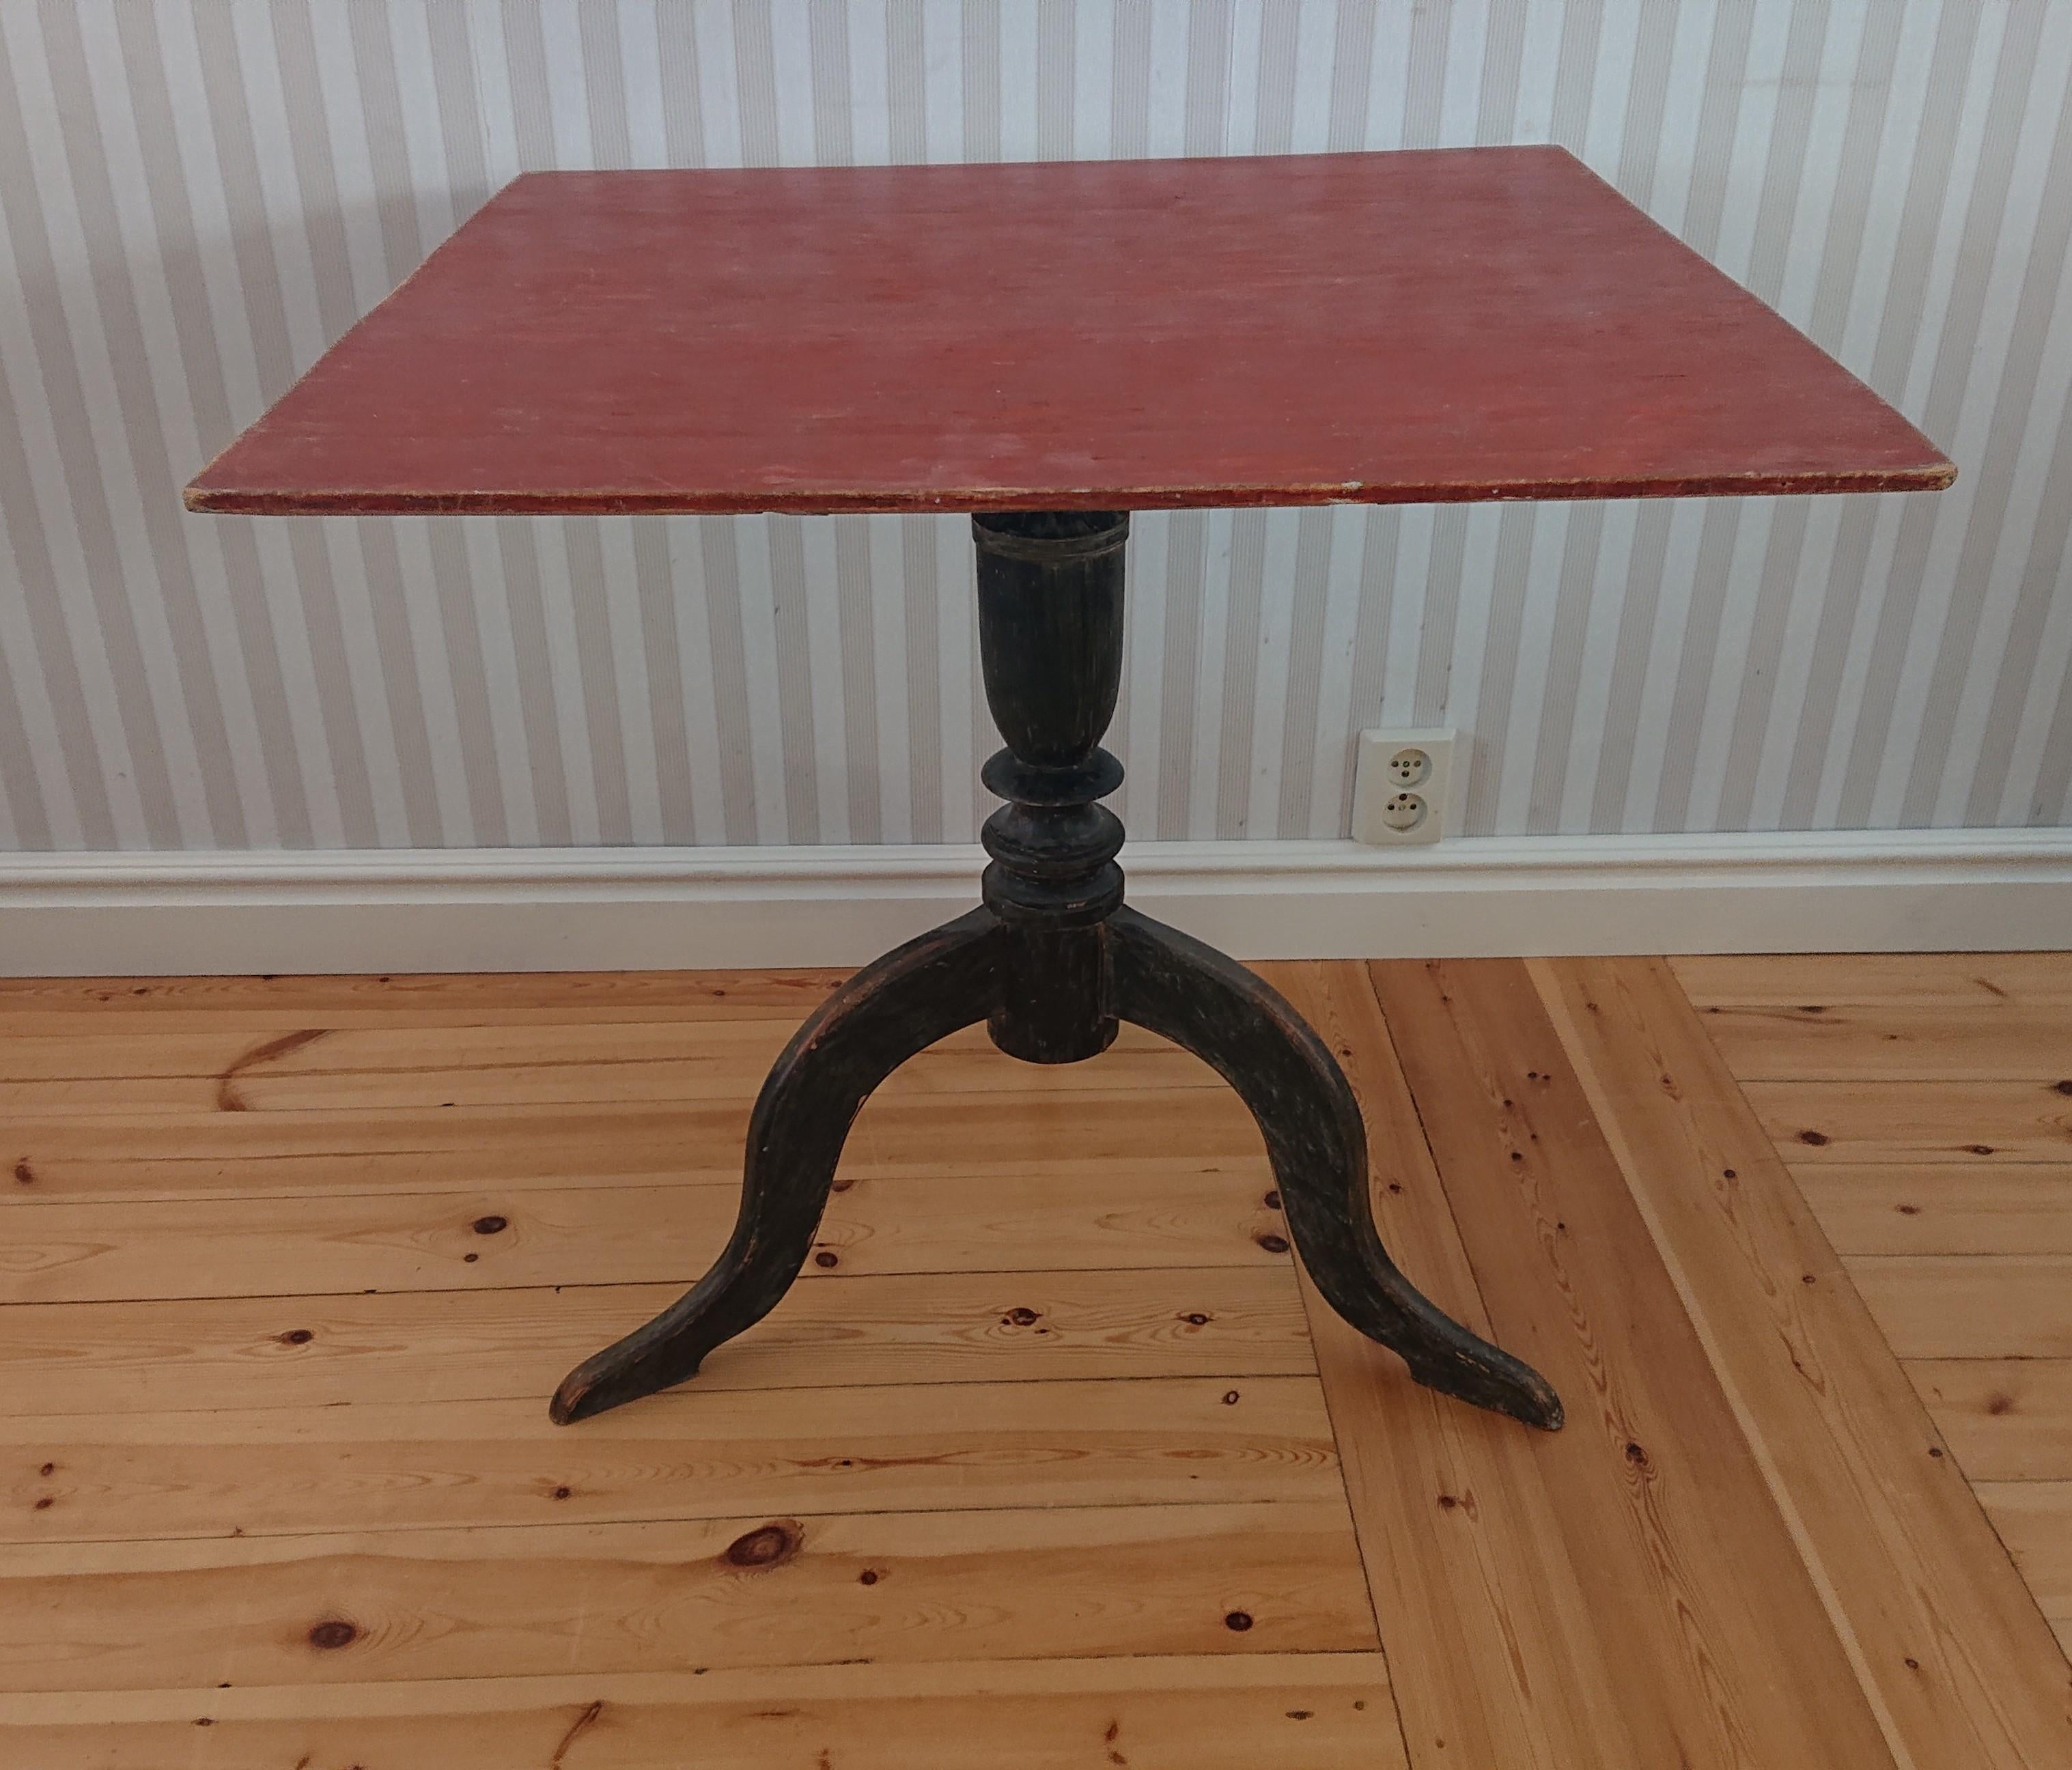 19th Century Swedish Tilt Top table from Skellefteå Västerbottem, Northern Sweden.
 Beautiful table scraped by hand to its well preserved original paint.
Turned base supported by beautifully carved legs.
Good antique condition with minor historic